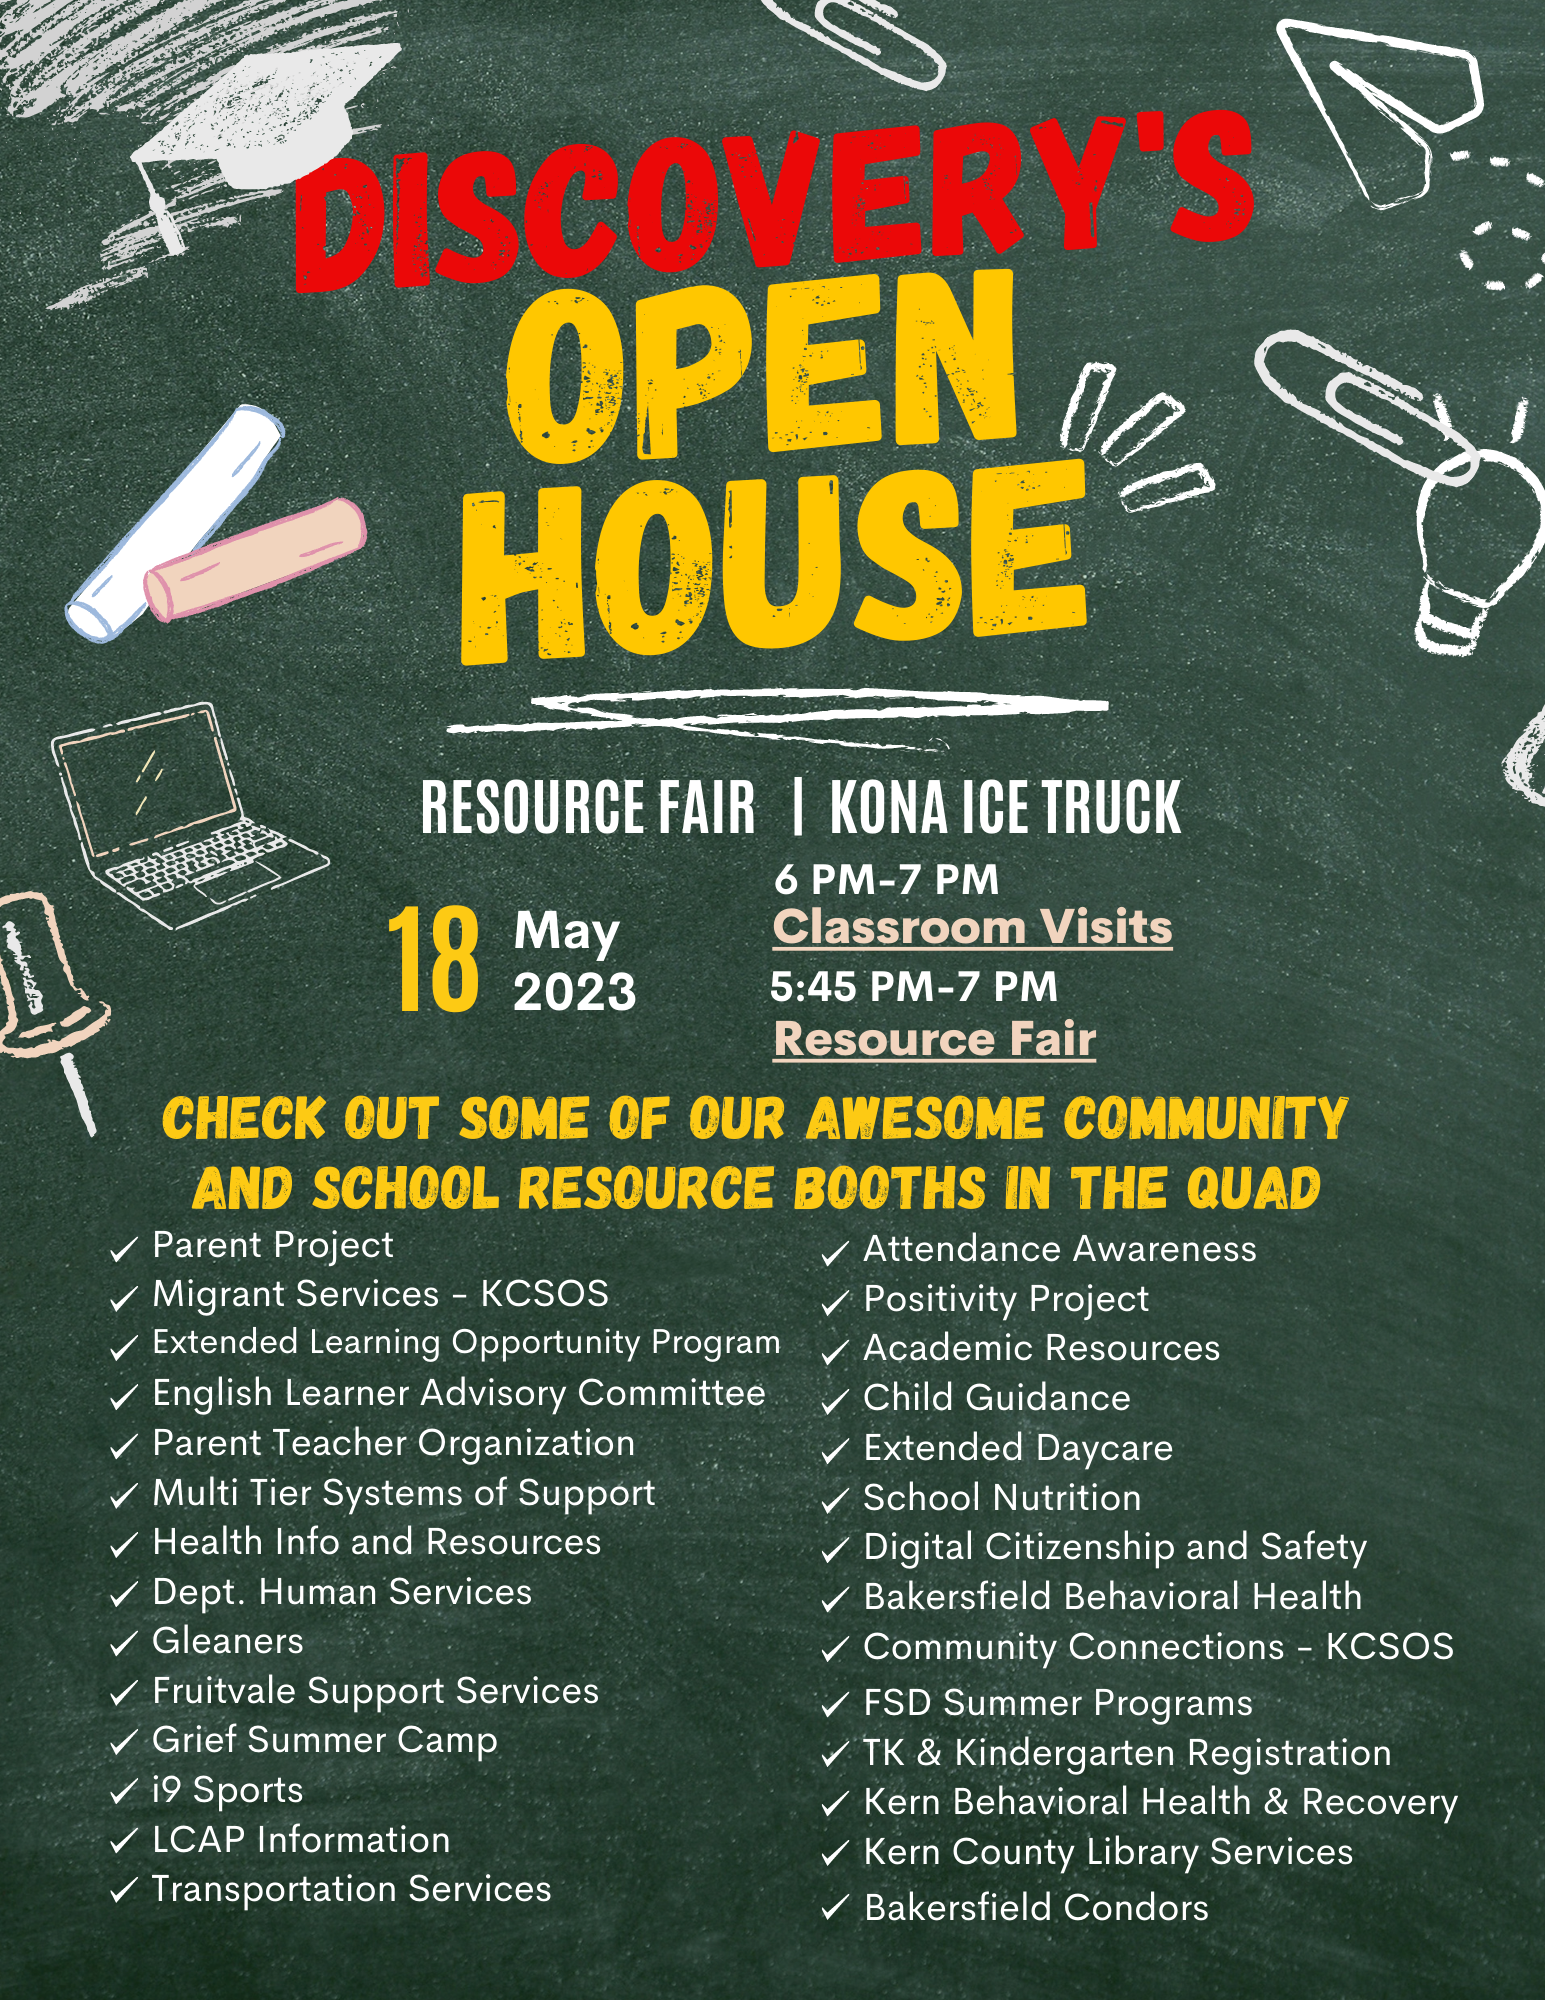 Discovery Open House is on May 18th from 6PM - 7PM. The Resource Fair will be running from 5:45 PM - 7 PM if you would like to attend before Classroom visits. 